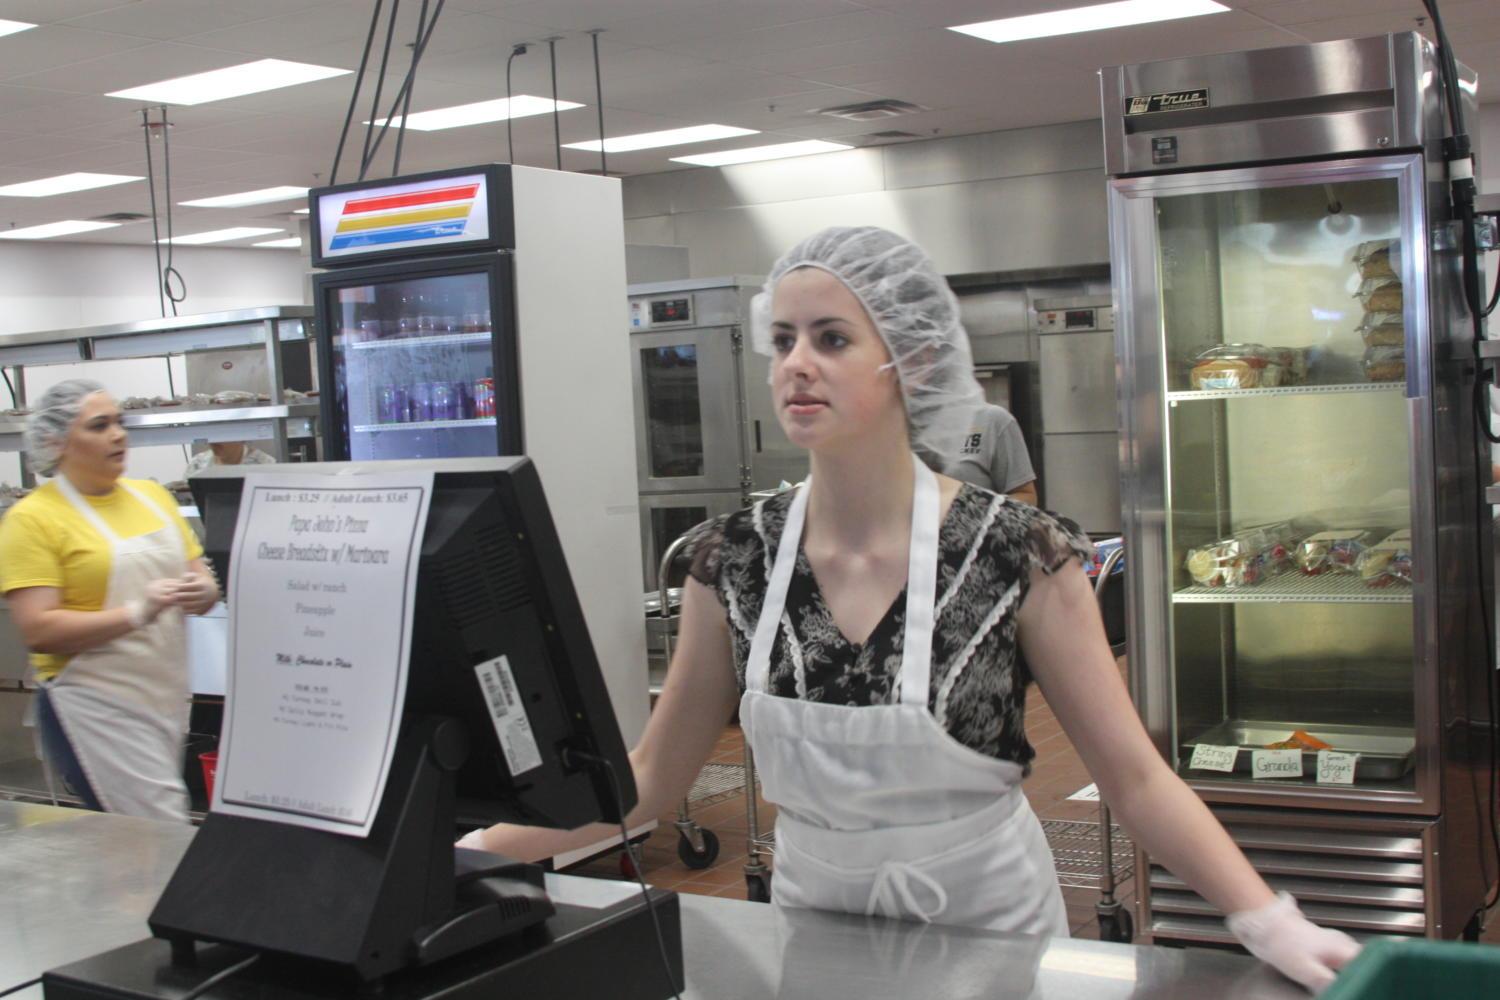 Applications now being accepted for cafeteria workers